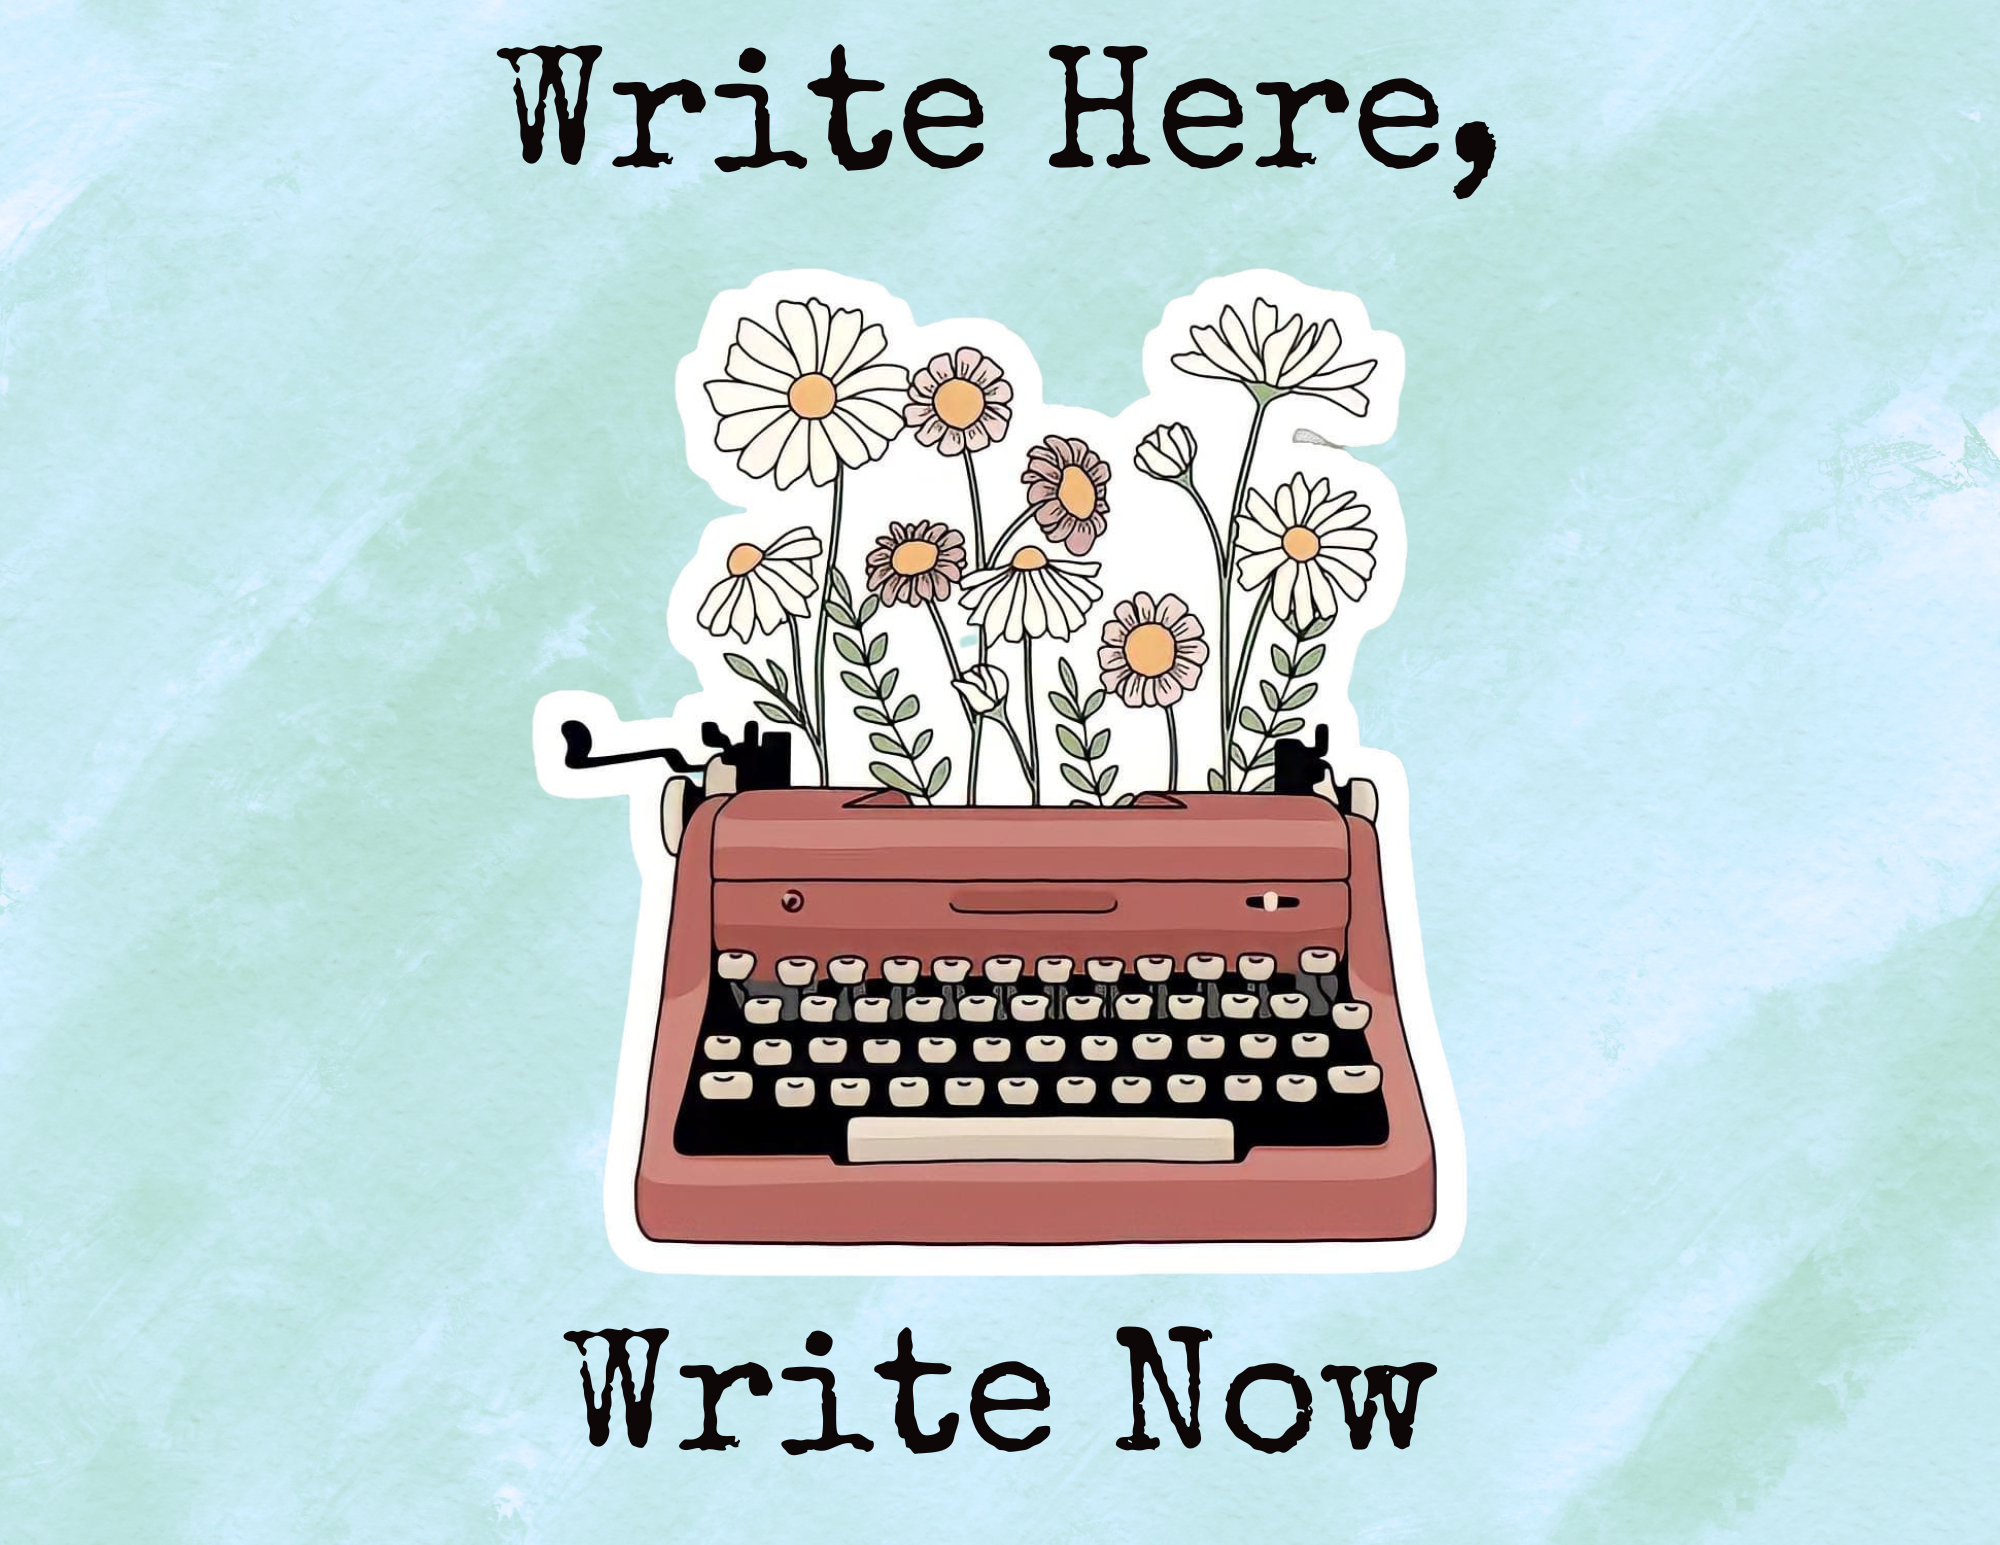 A typewriter with flowers on a pastel teal background. Text reads "Write Here, Write Now."